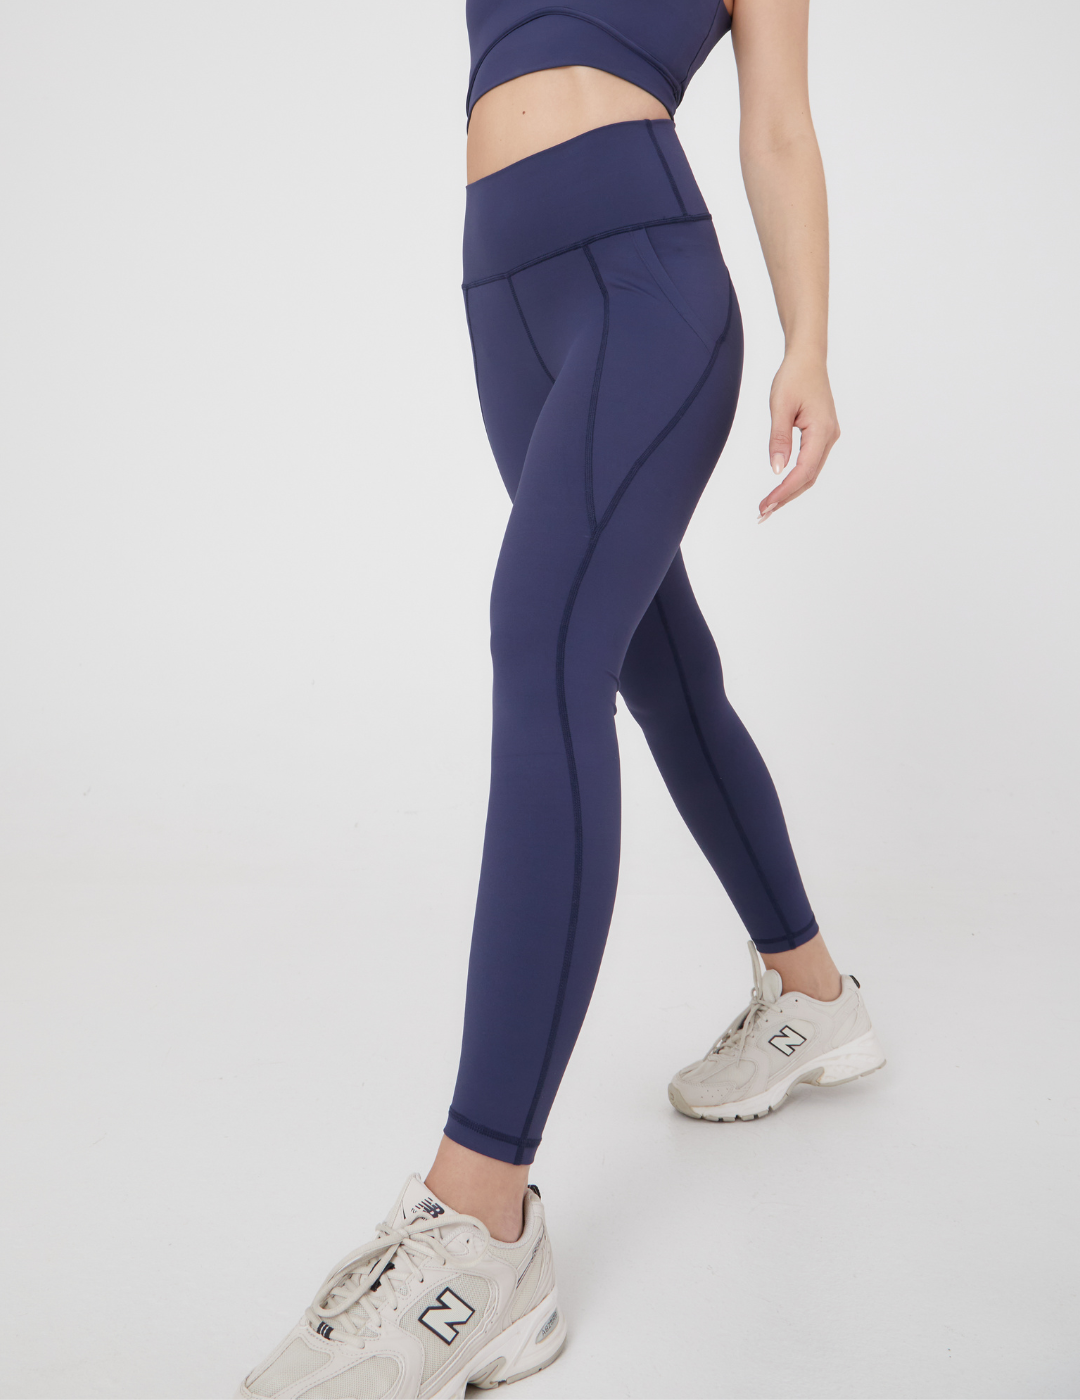 All Fenix Rise 7/8 Pocket Legging - Navy – Curated for Sport